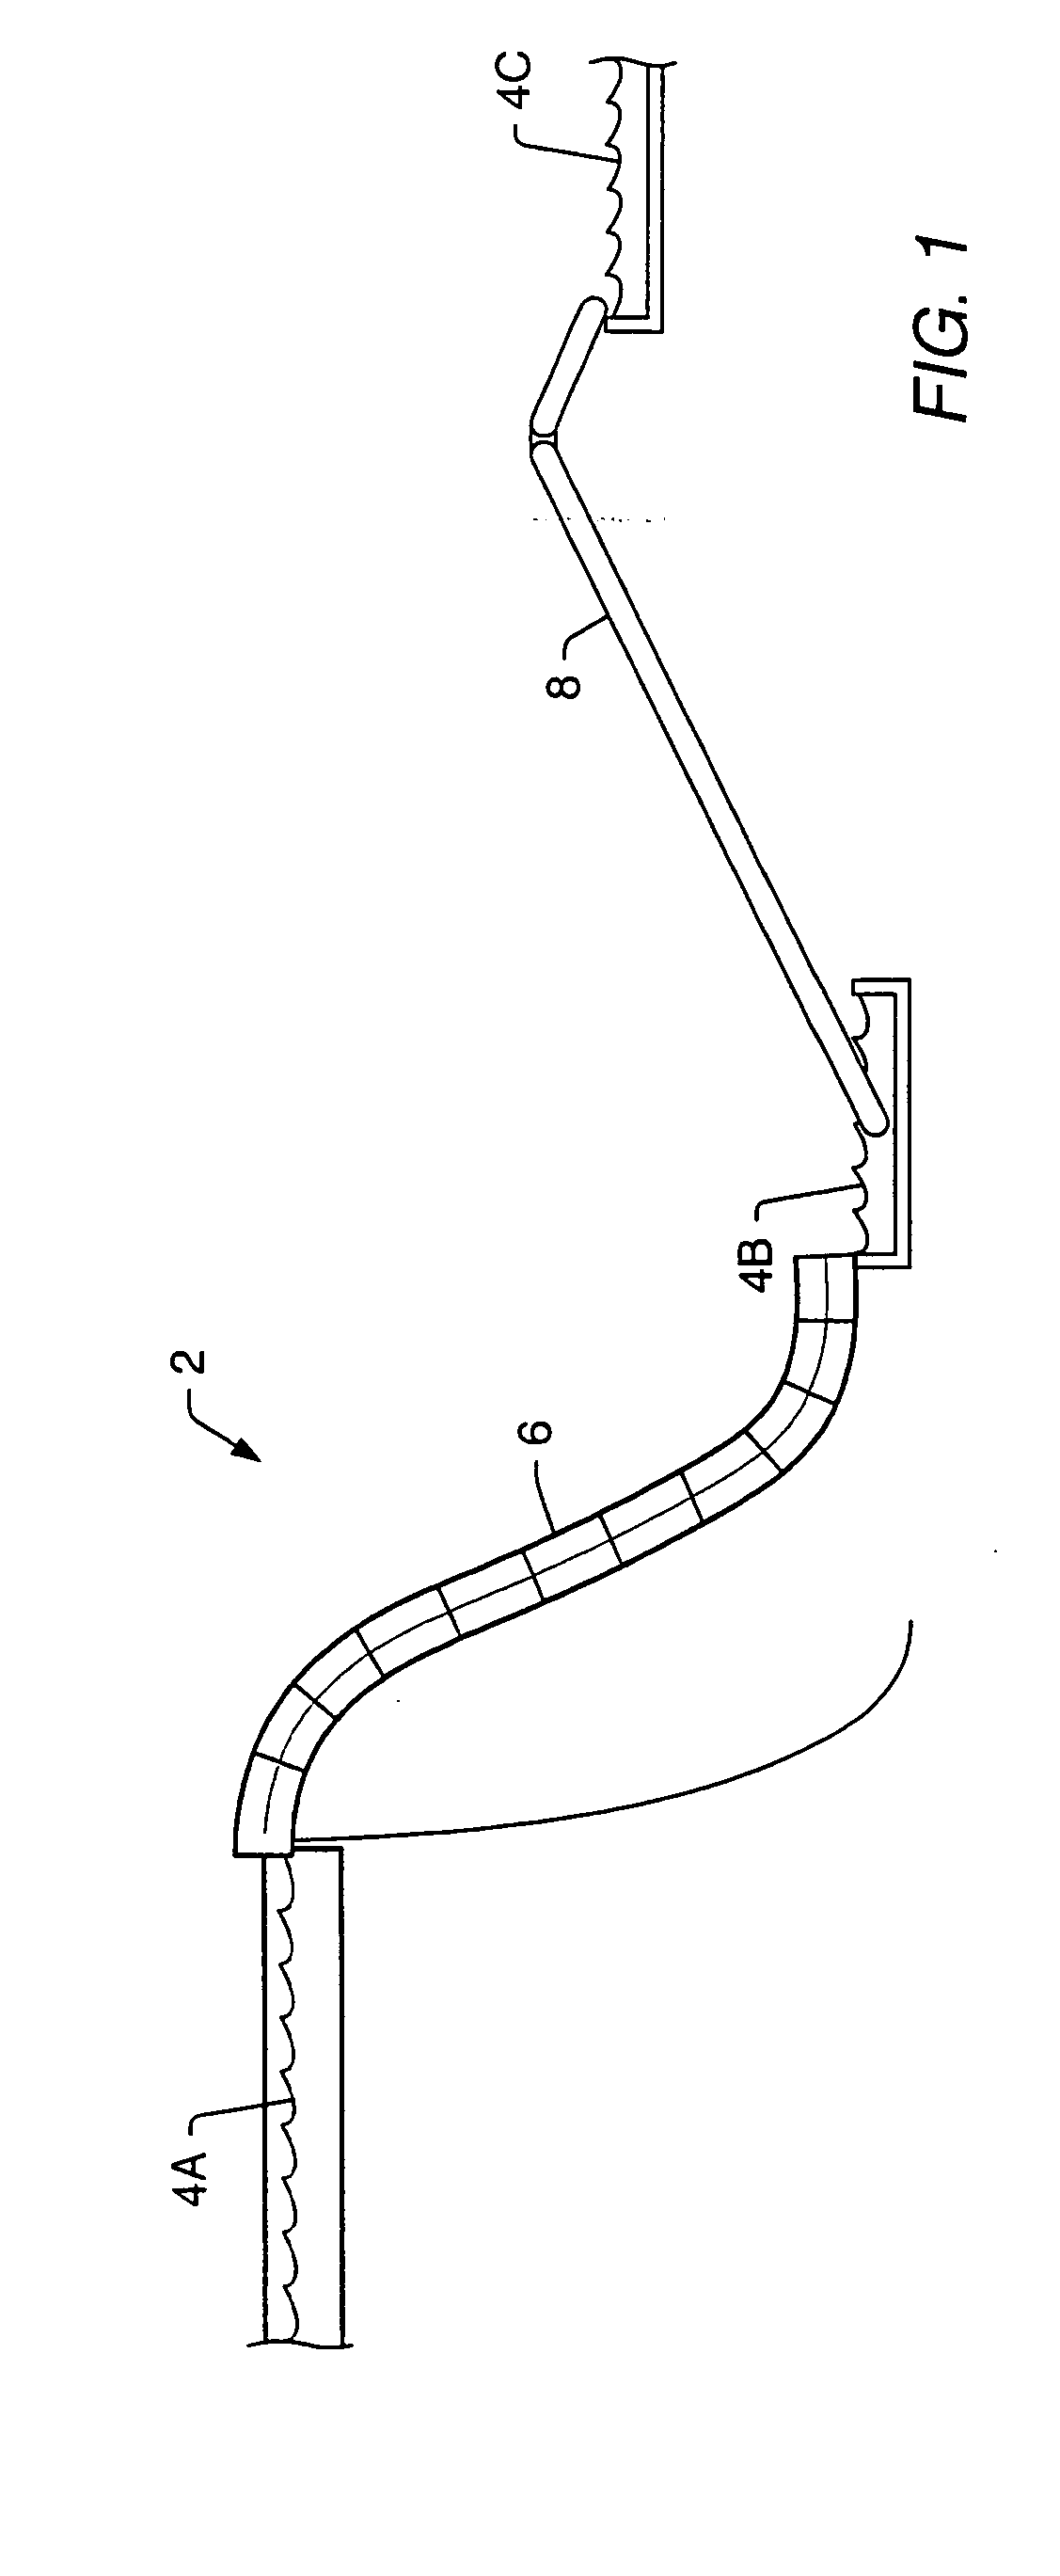 Method and system of positionable screens for water amusement parks